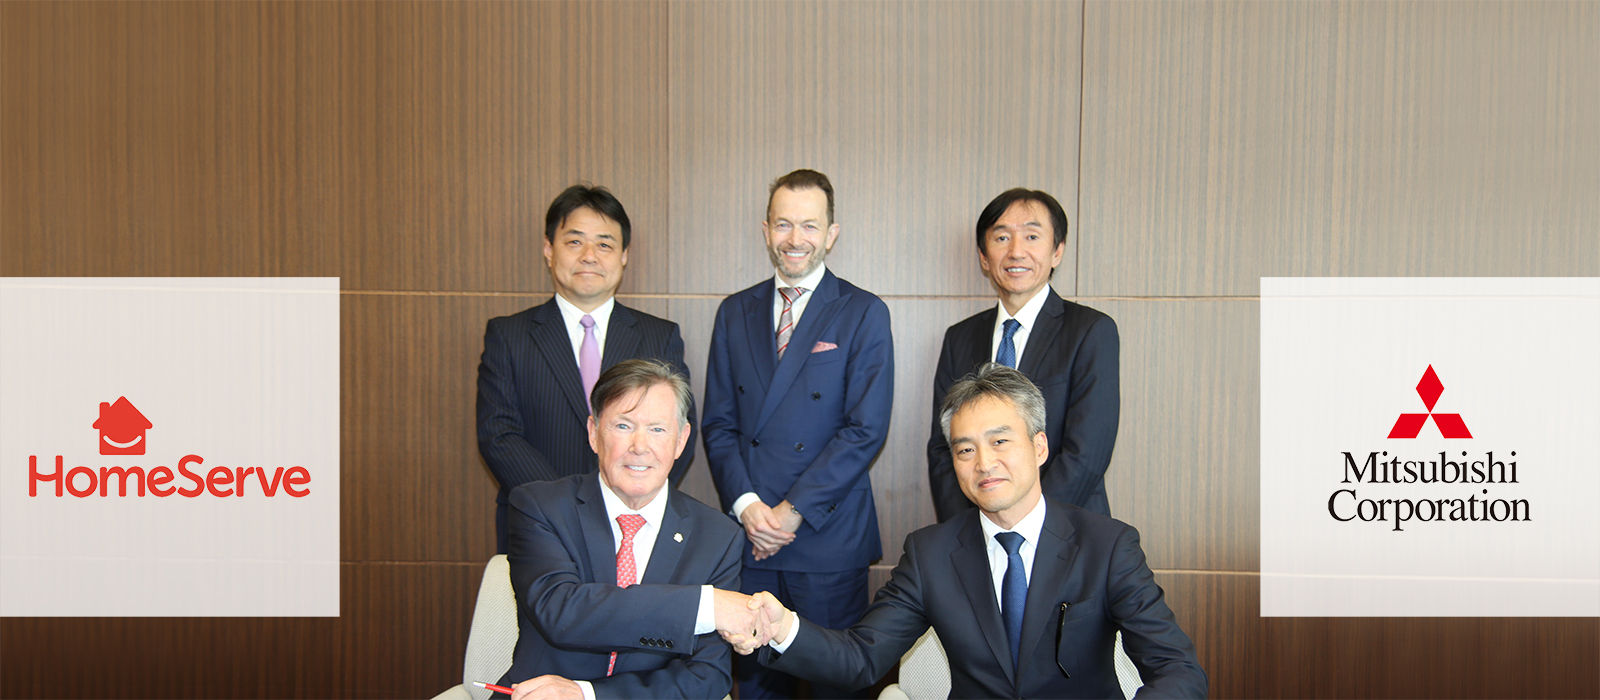 UK domestic repairs firm HomeServe links with Mitsubishi to enter Japan